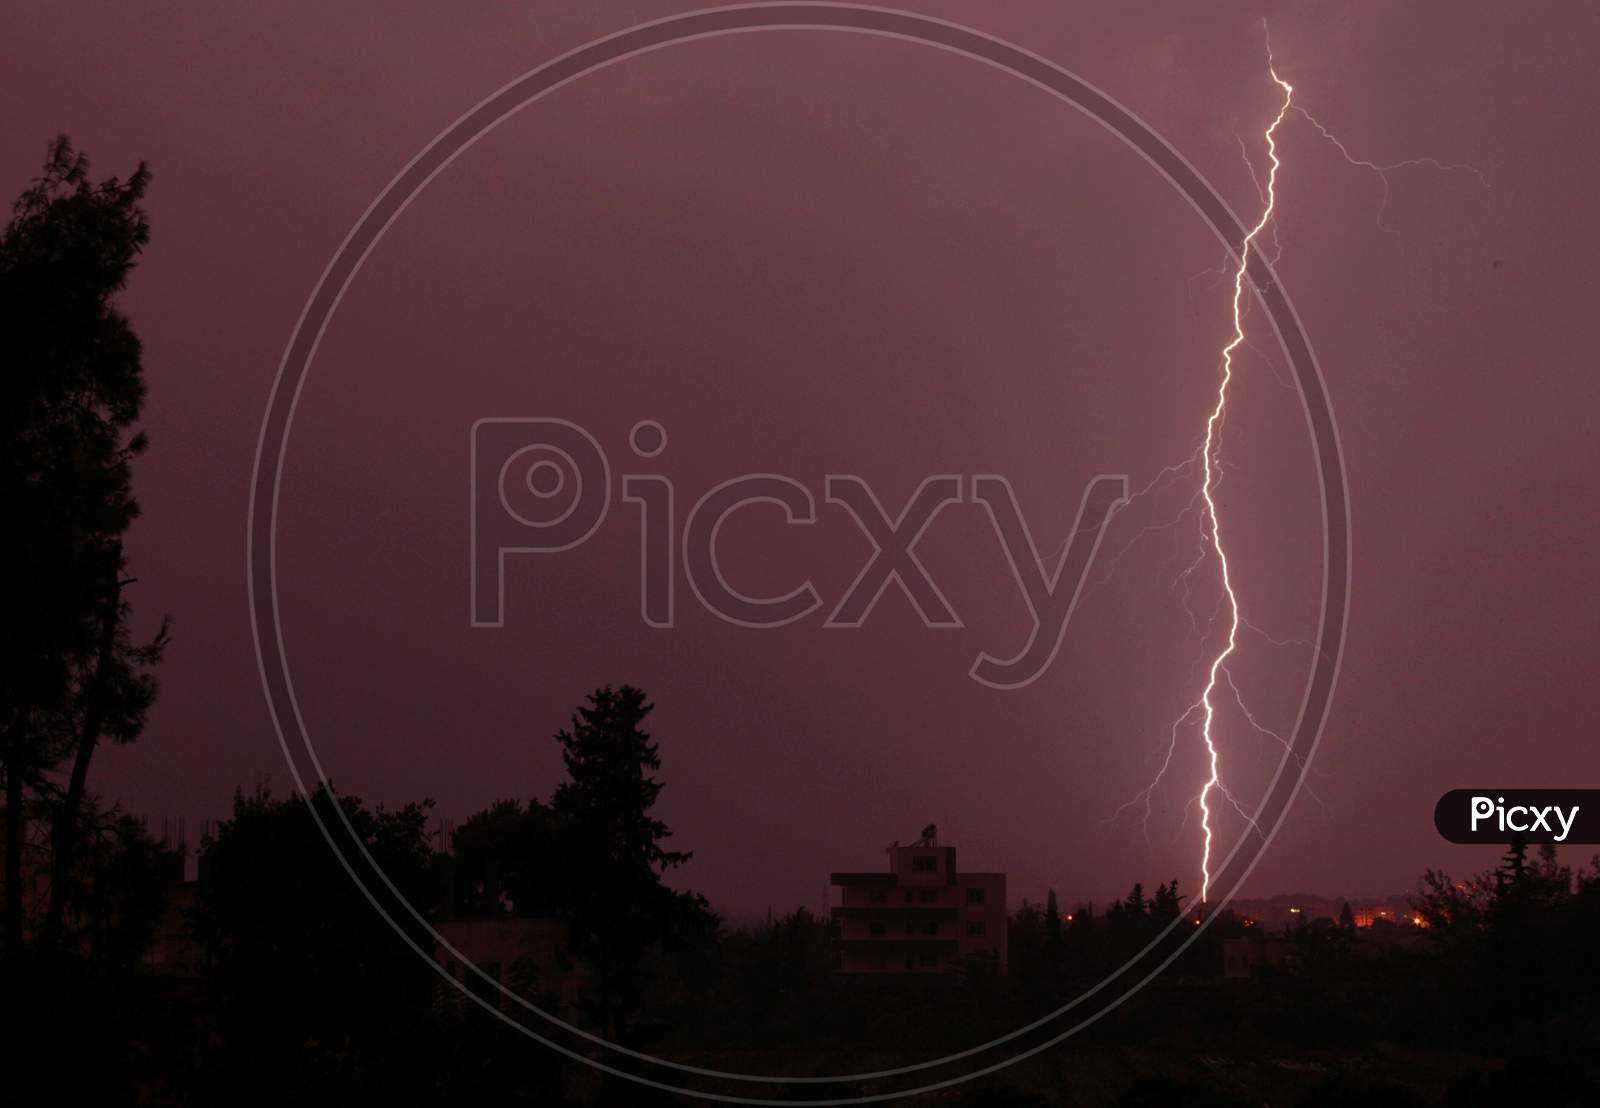 Lightning in the city-Purple coloured lightning in the sky-lightning, storm, thunder, electricity, sky, bolt, electric,purple flash, weather, thunderstorm, night, abstract, light, rain, strike, energy, nature, cloudy day